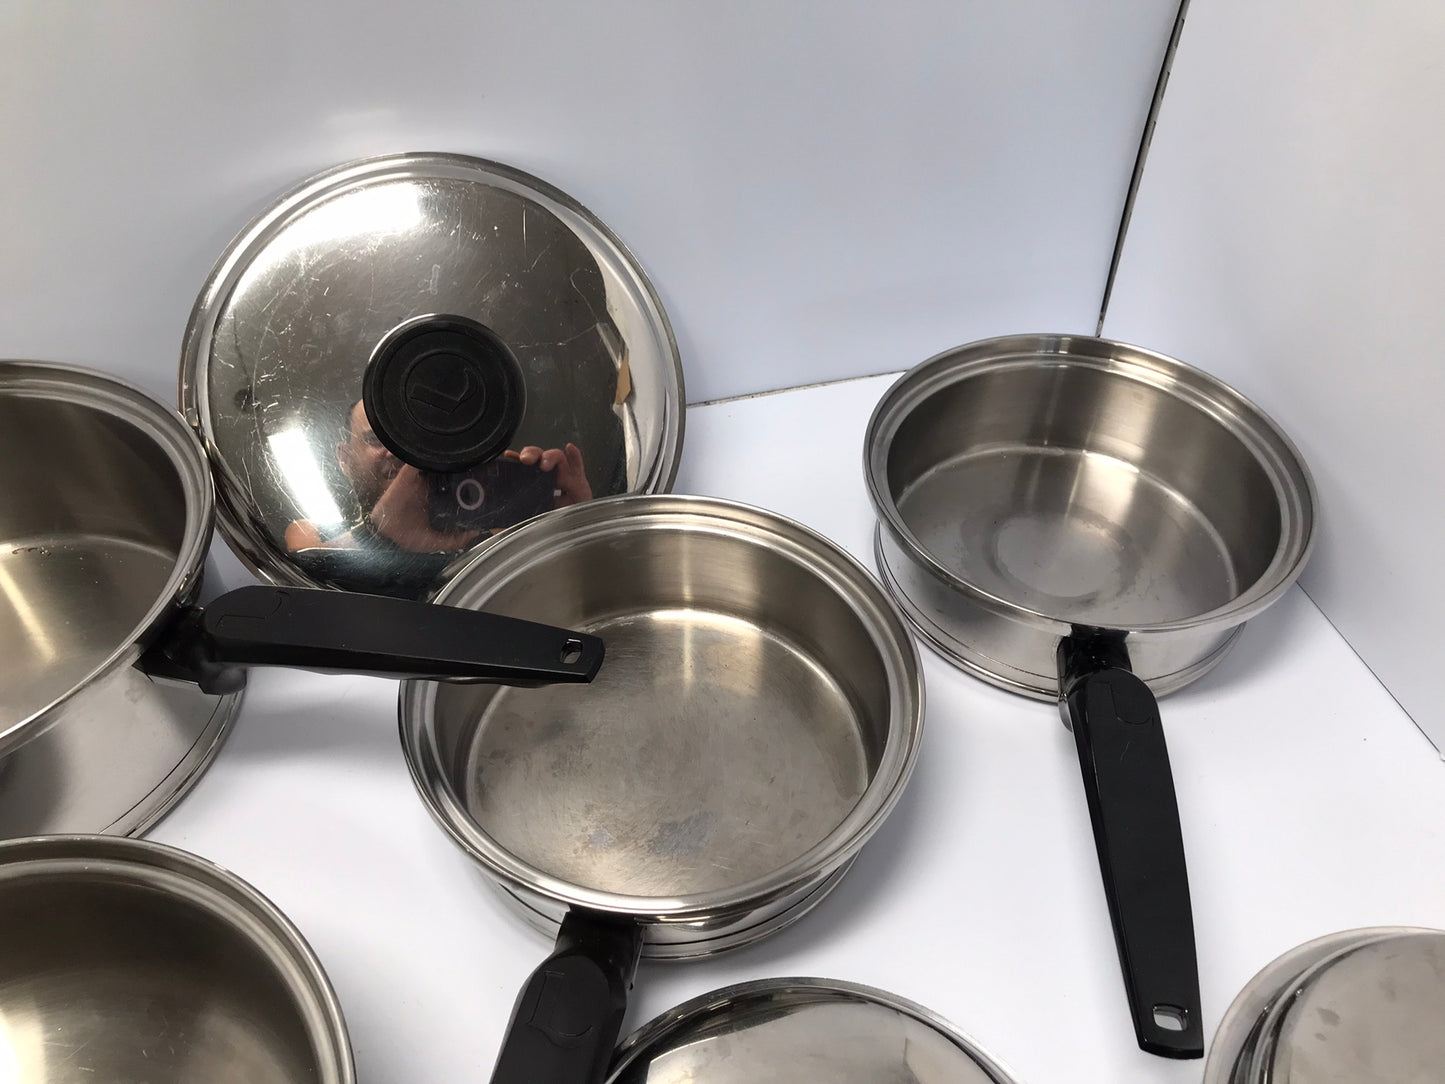 Lifetime Stainless Steel Cookware Set Lifetime Warranty 10 Piece With Dome Pot Lits and Reg Lids Like New